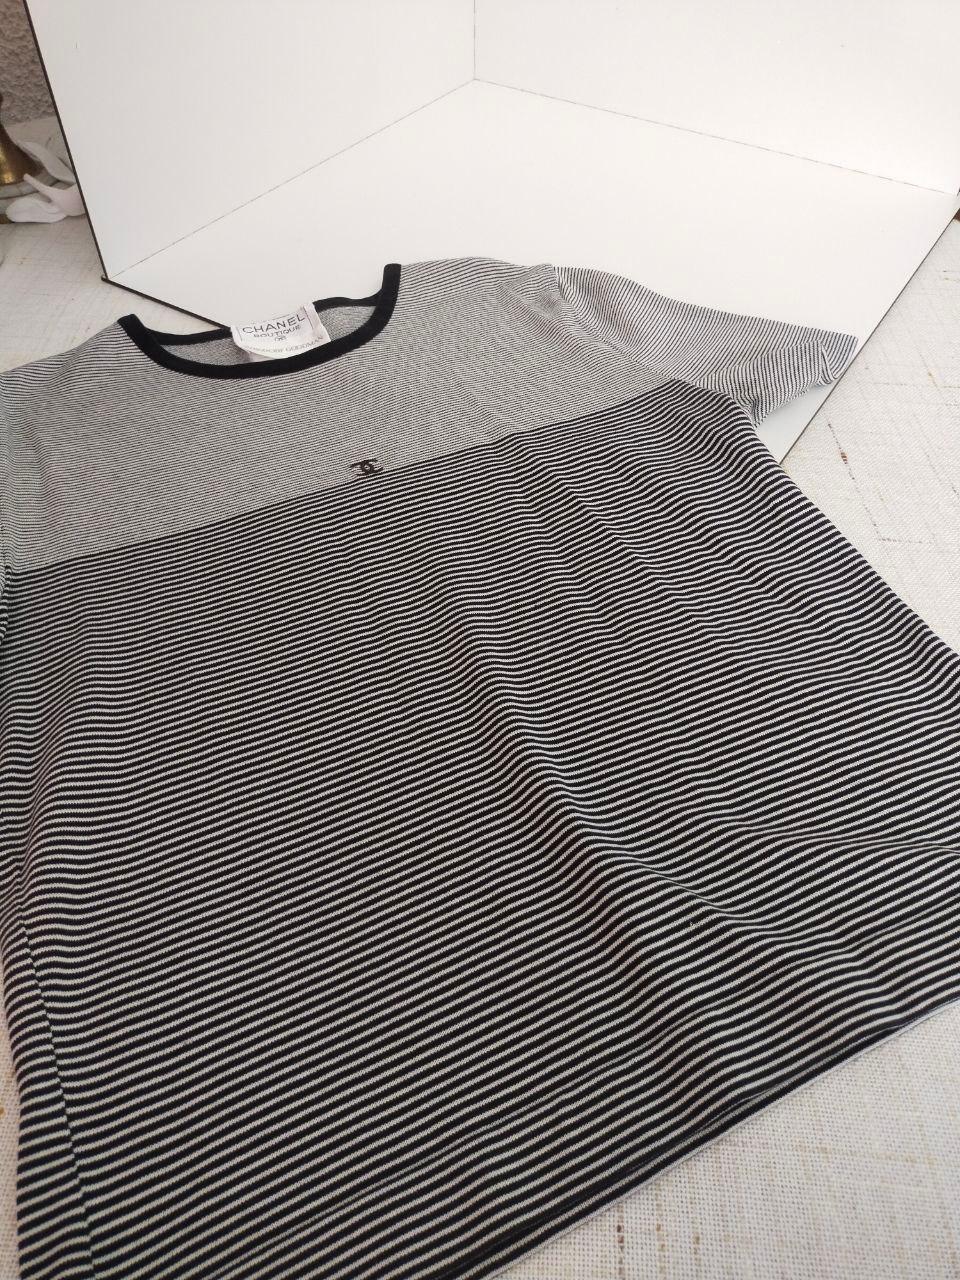 Rare! Chanel 97c Karl Lagerfeld 1997 Logo striped T-Shirt Pre-Owned Old Money  For Sale 10